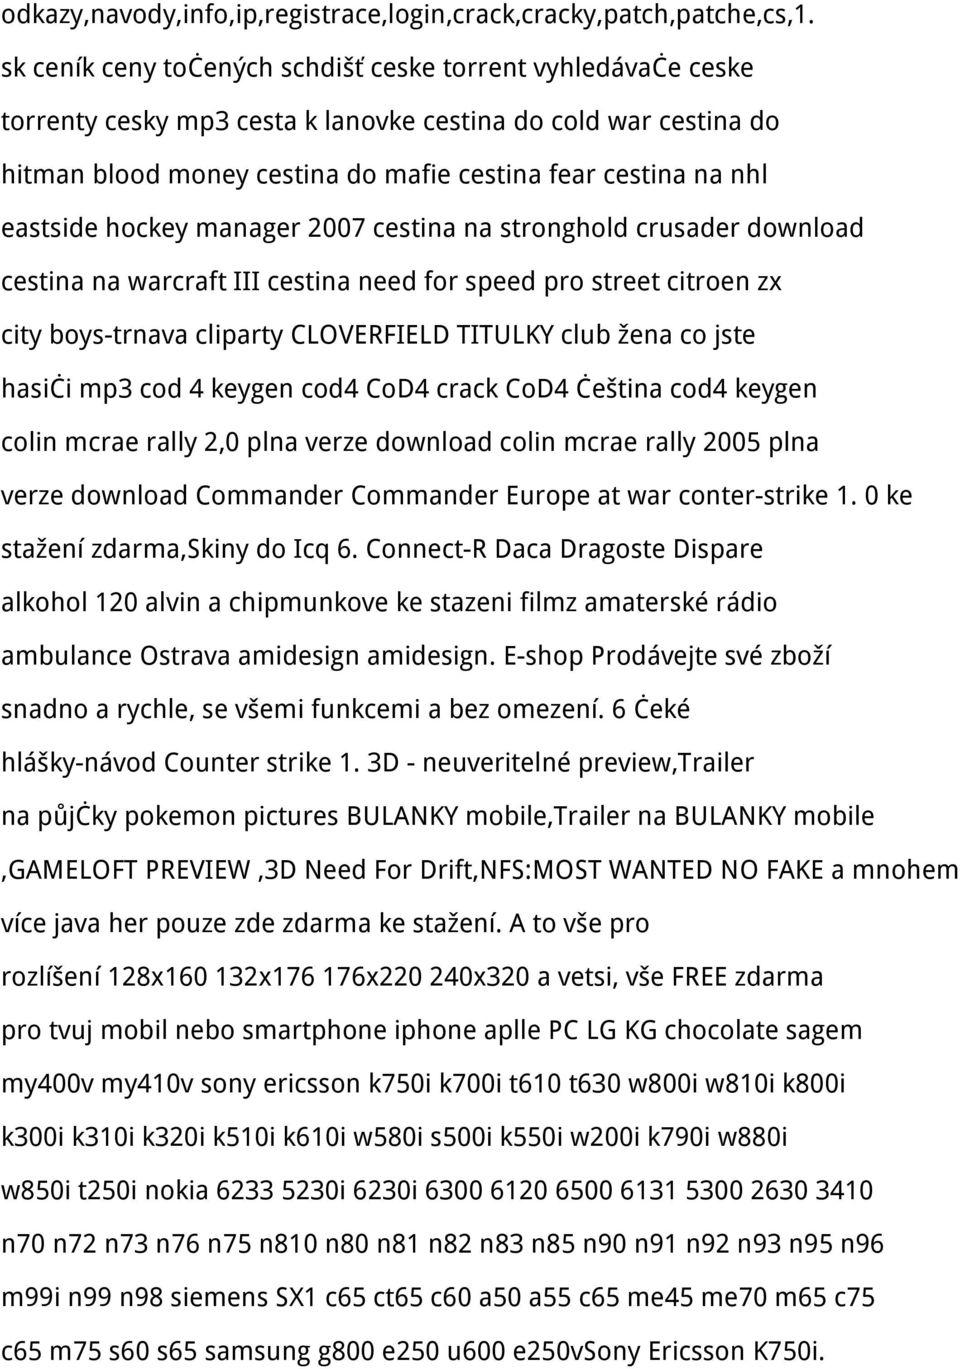 eastside hockey manager 2007 cestina na stronghold crusader download cestina na warcraft III cestina need for speed pro street citroen zx city boys-trnava cliparty CLOVERFIELD TITULKY club žena co